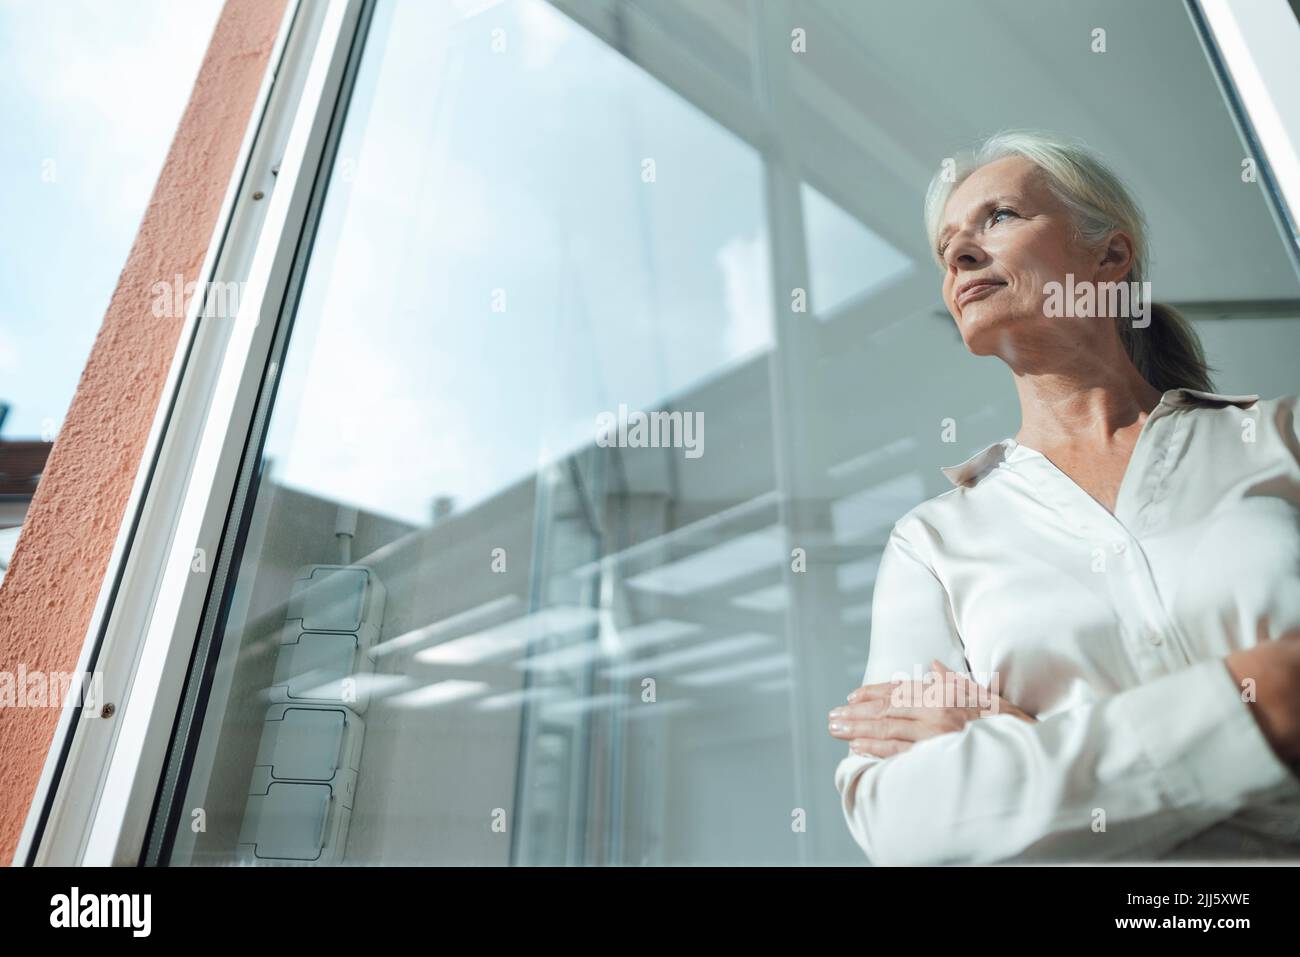 Thoughtful businesswoman standing with arms crossed seen through glass Stock Photo